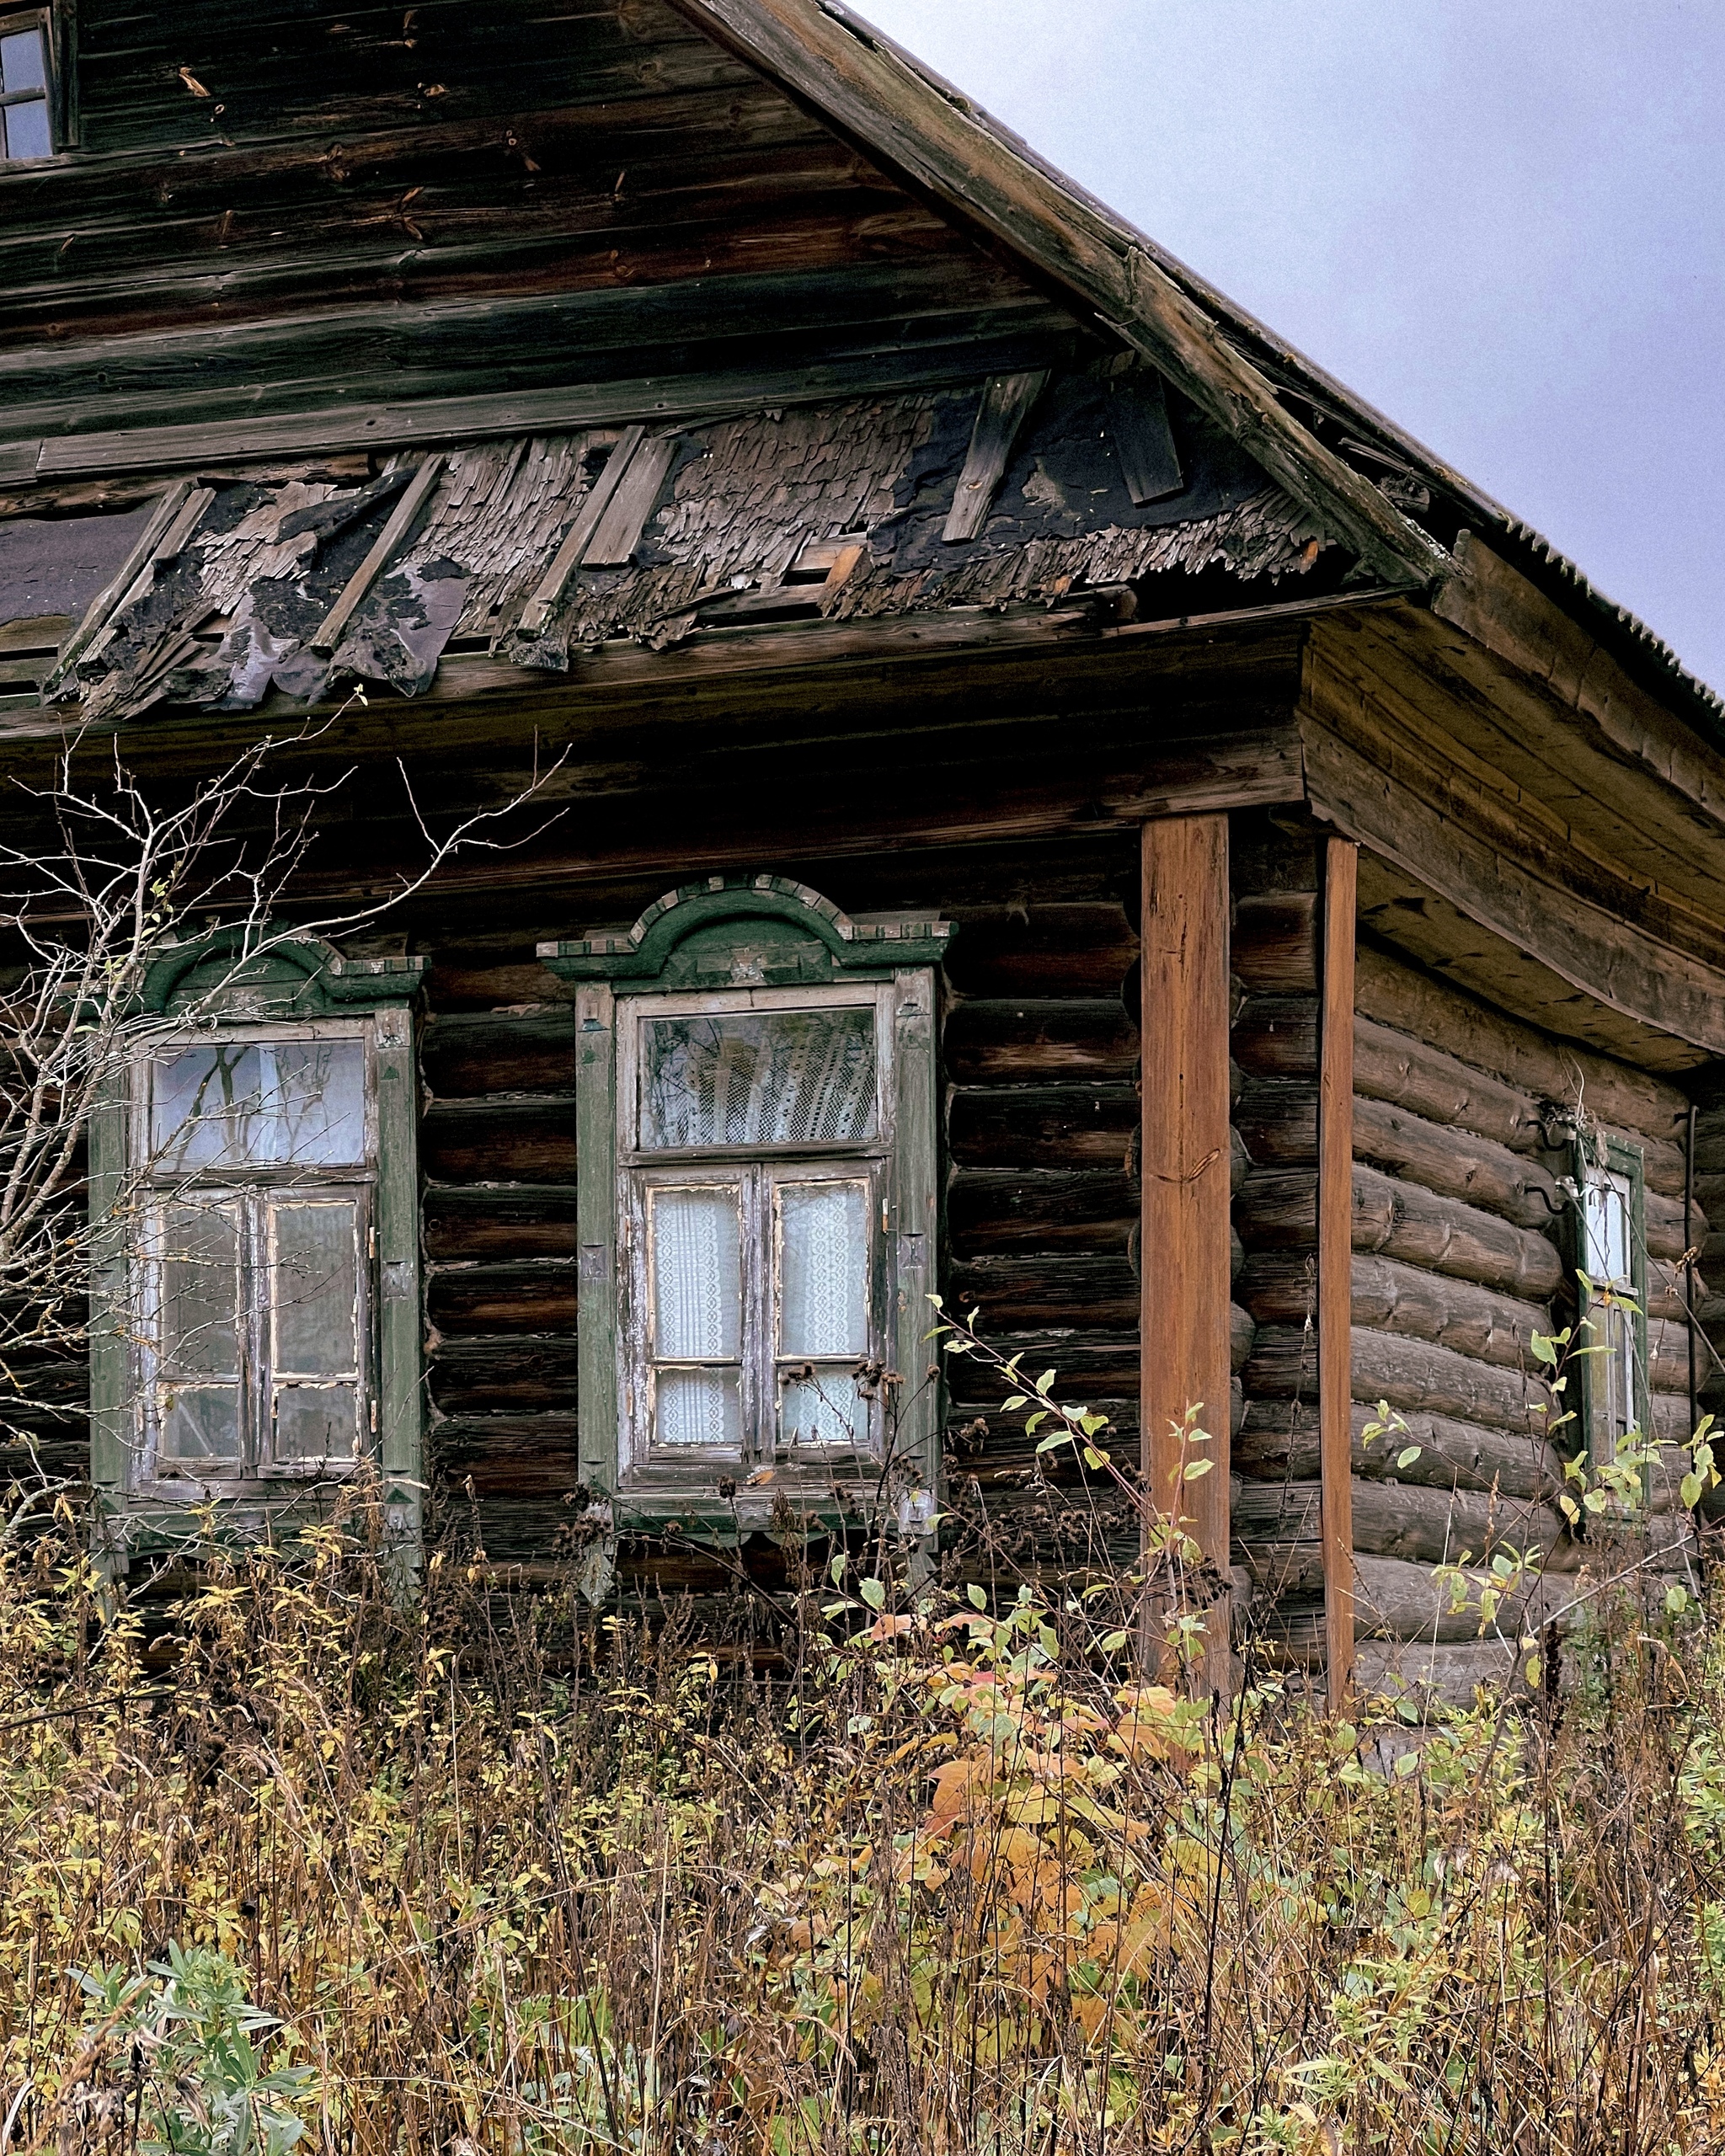 Rural ashes straight from the Tver region - Outskirts, Tver region, Village, House, Longpost, The photo, Izba, Tree house, Wooden house, Russia, Tourism, Travels, Travel across Russia, My